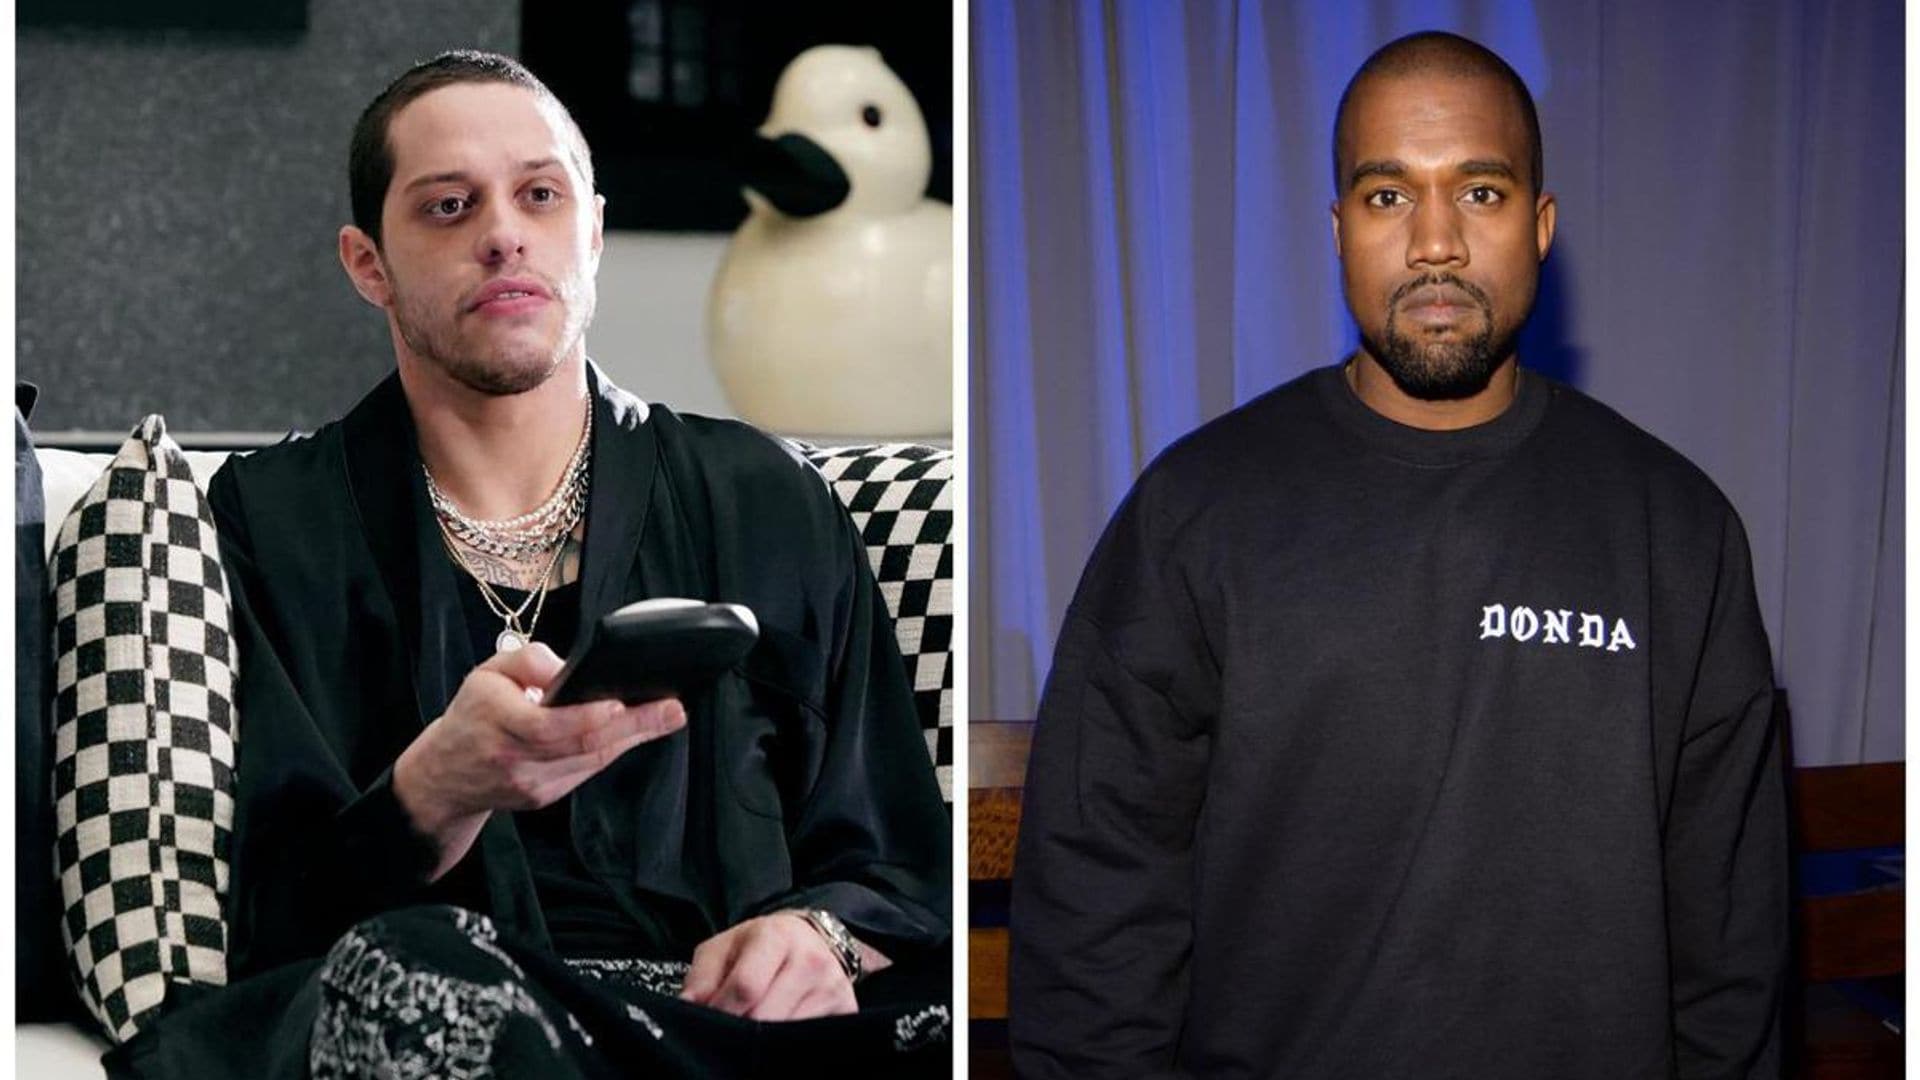 Pete Davidson is reportedly seeing a therapist due to Kanye West's online bullying and harassment behavior